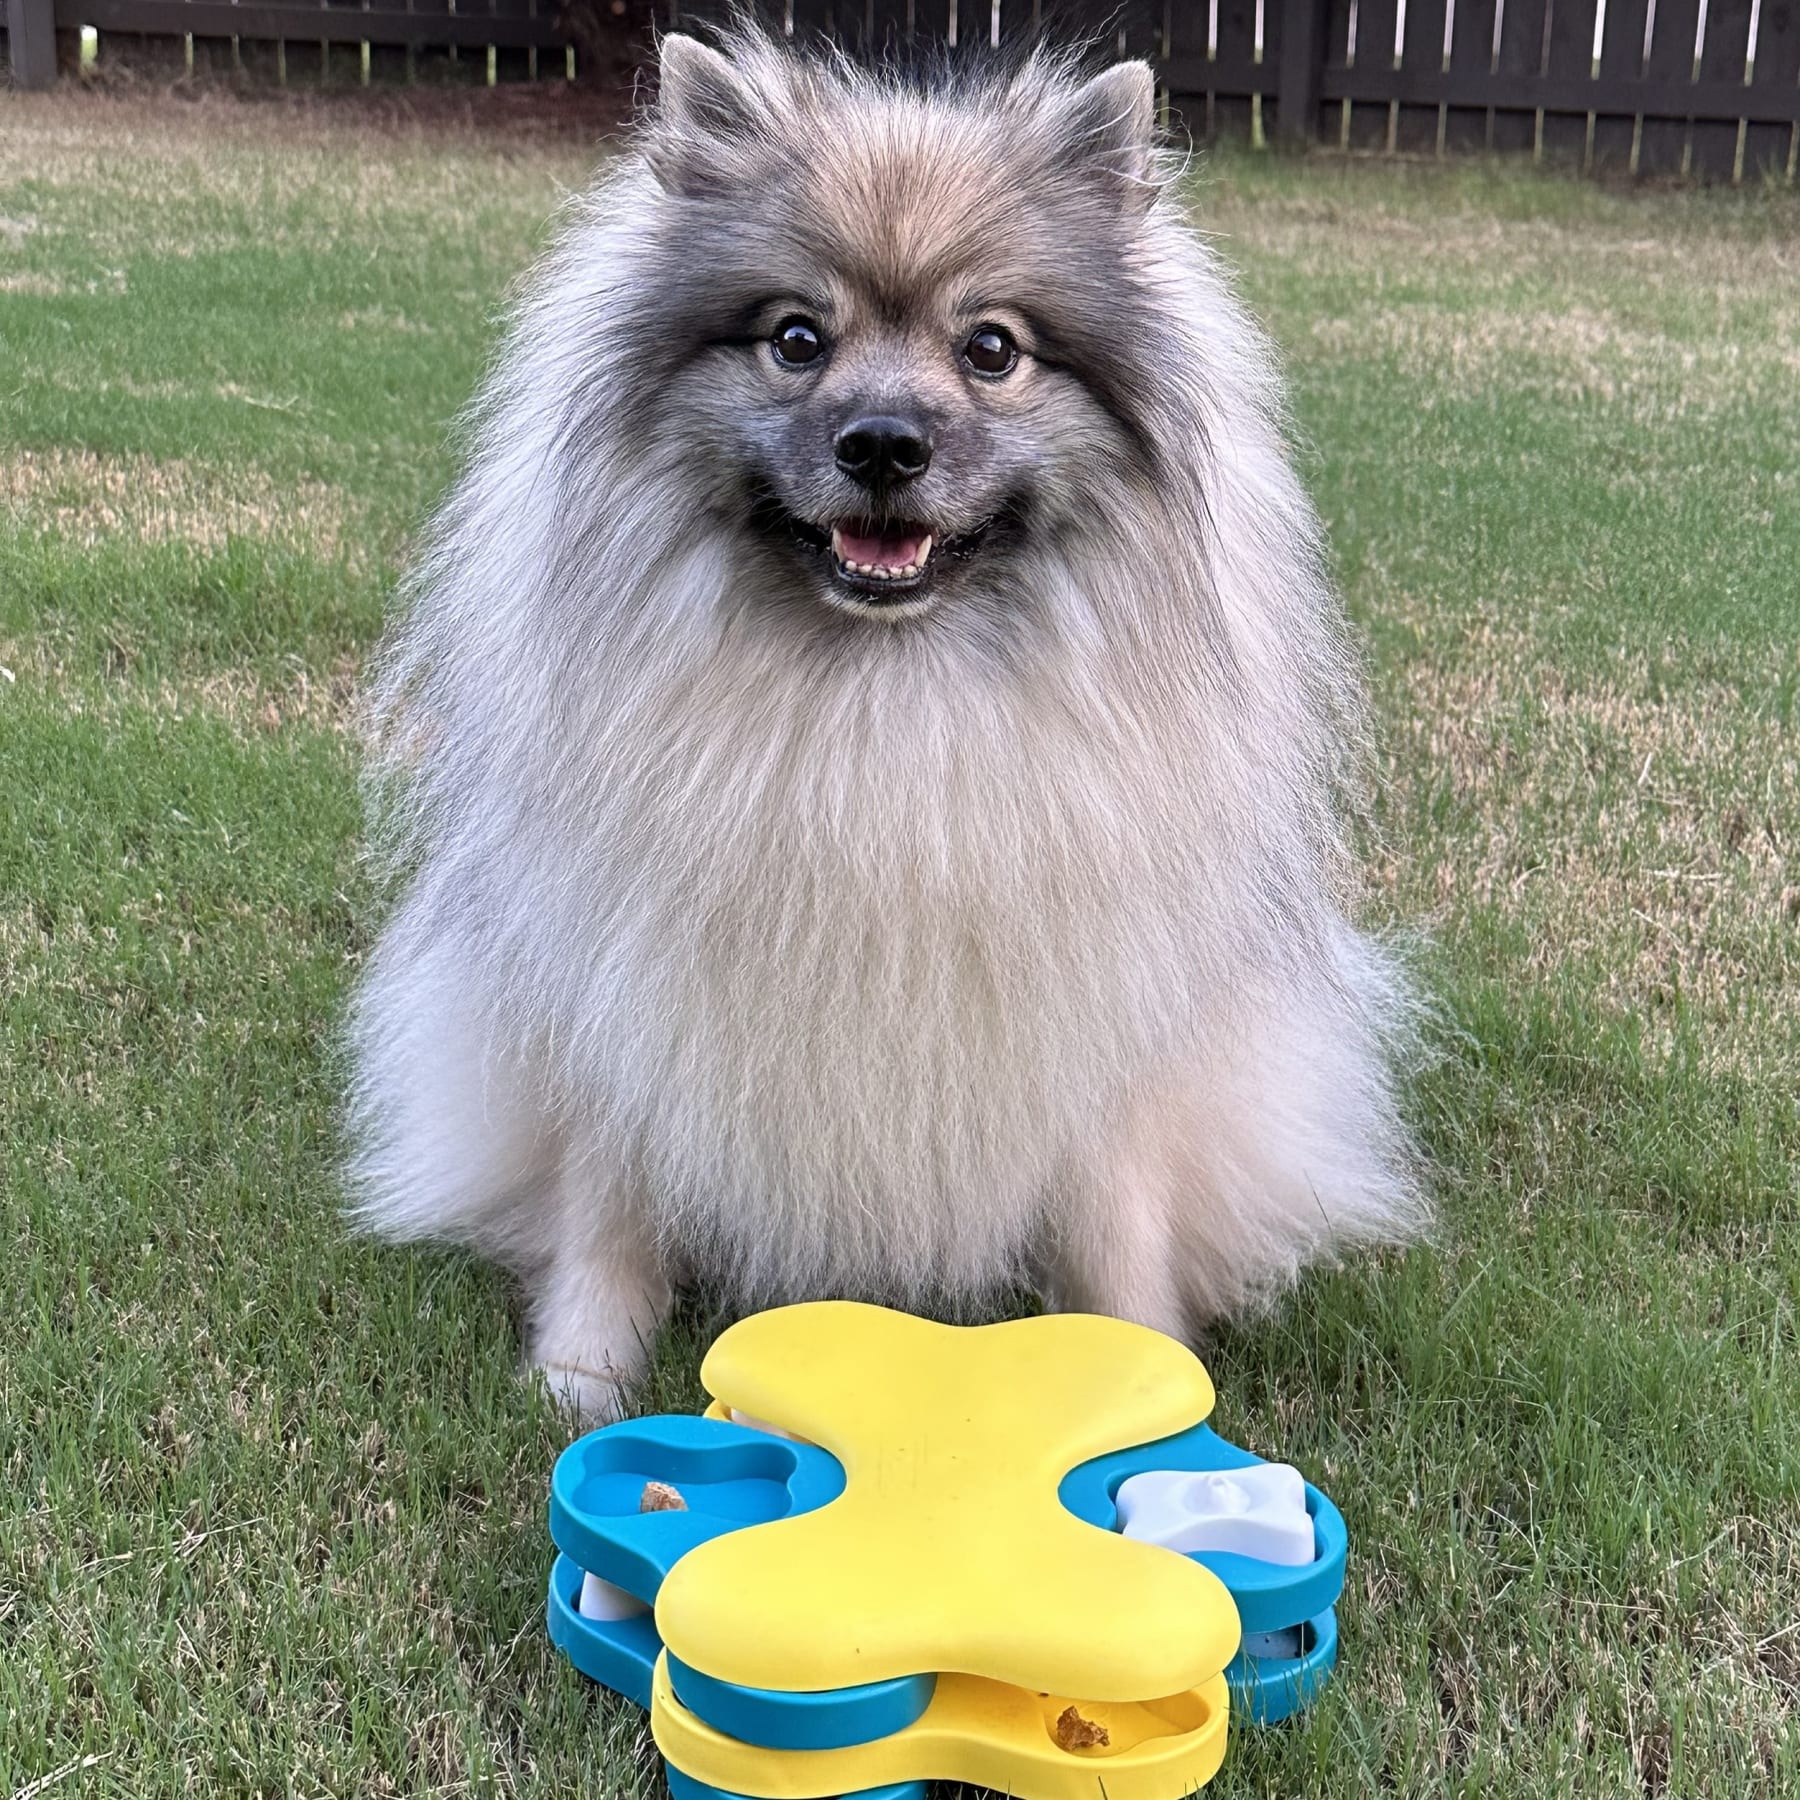 Keeshond dog sits on grass in front of puzzle toy.